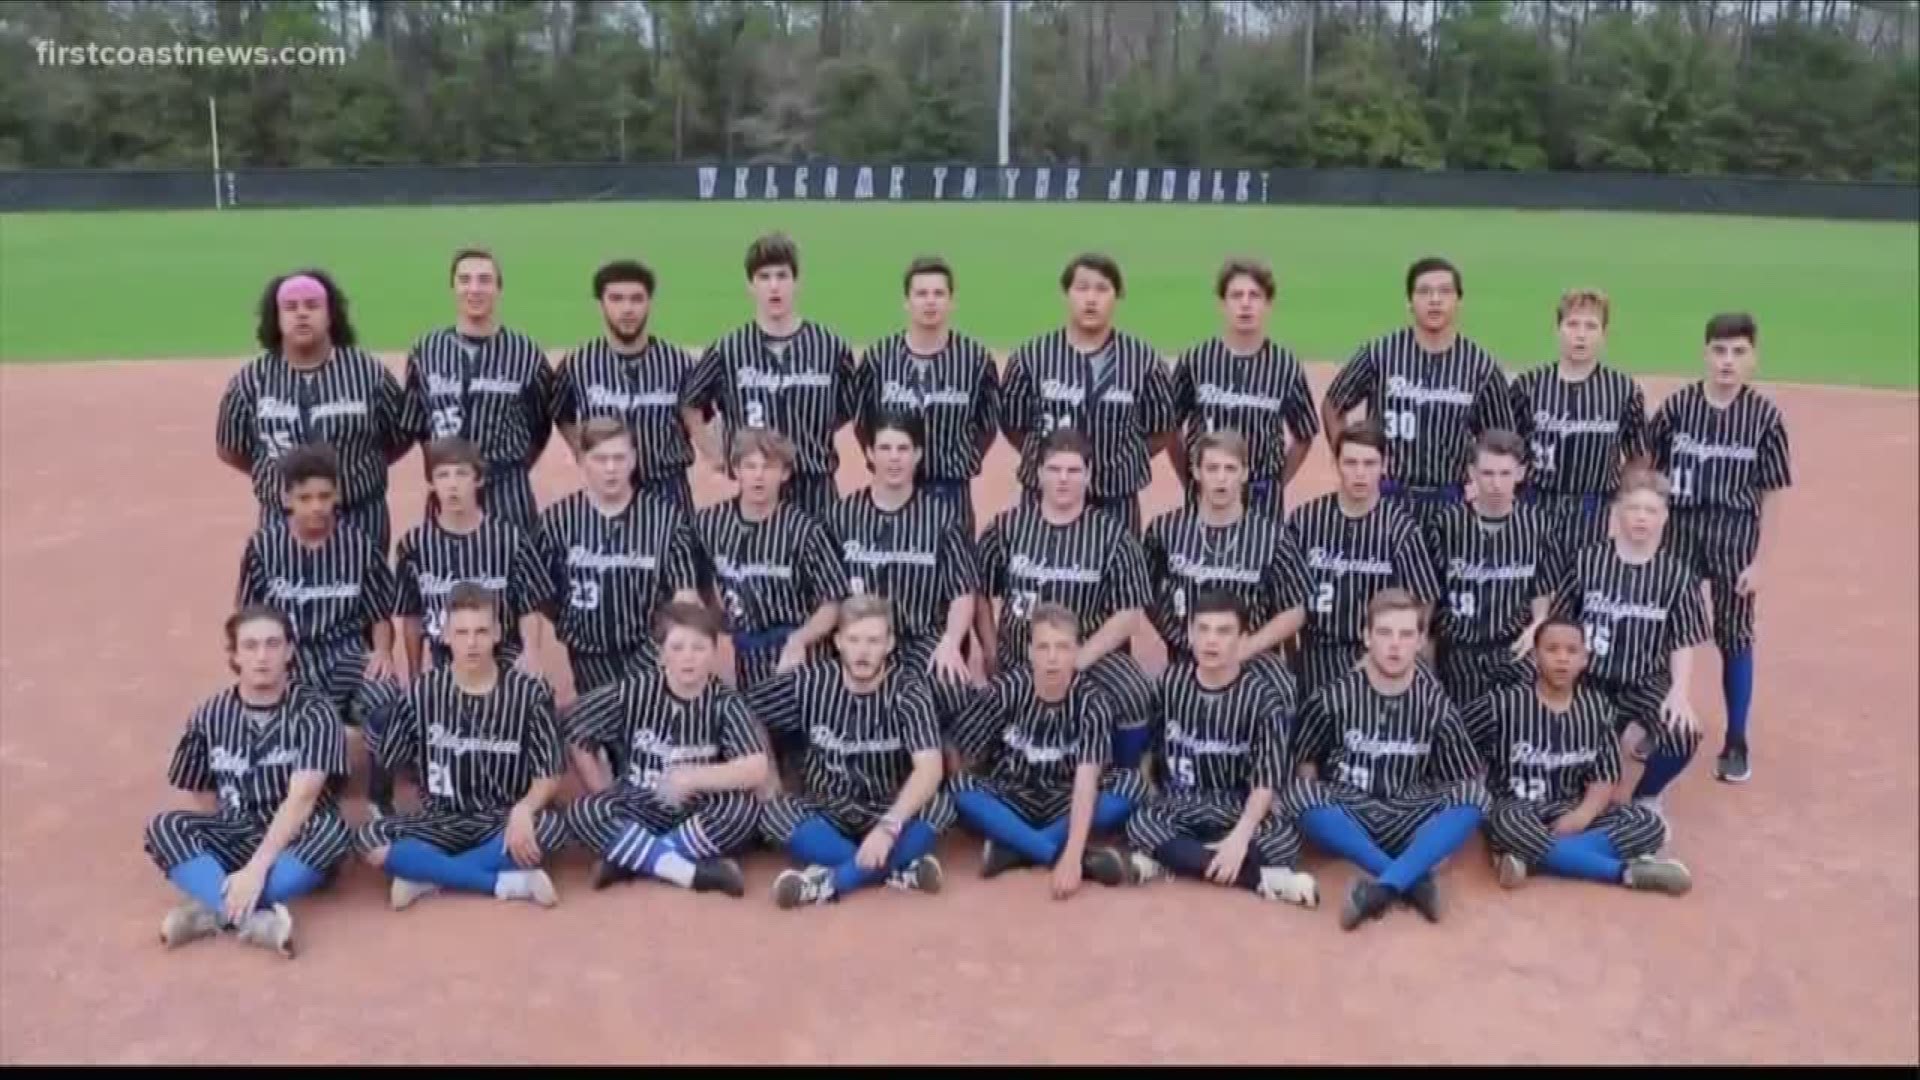 The Ridgeview Baseball team has big plans for the 2020 season -- but they need your support